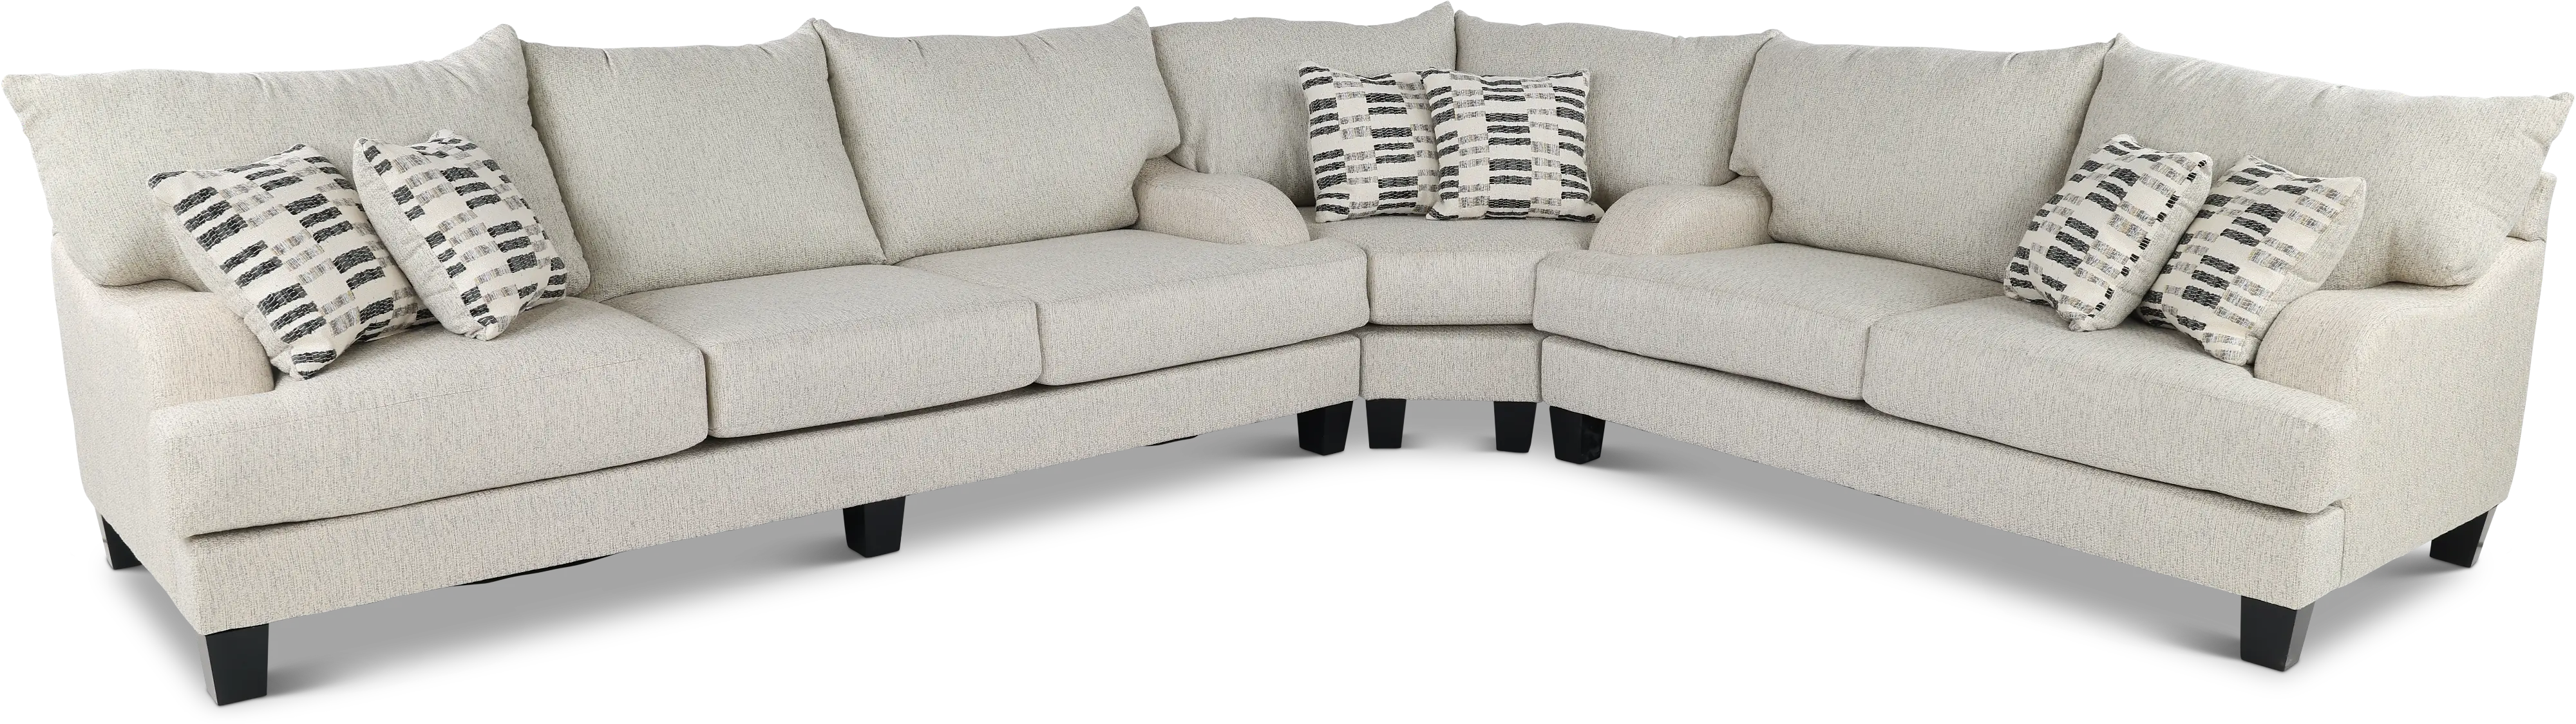 Laguna Off-White 3 Piece Sectional